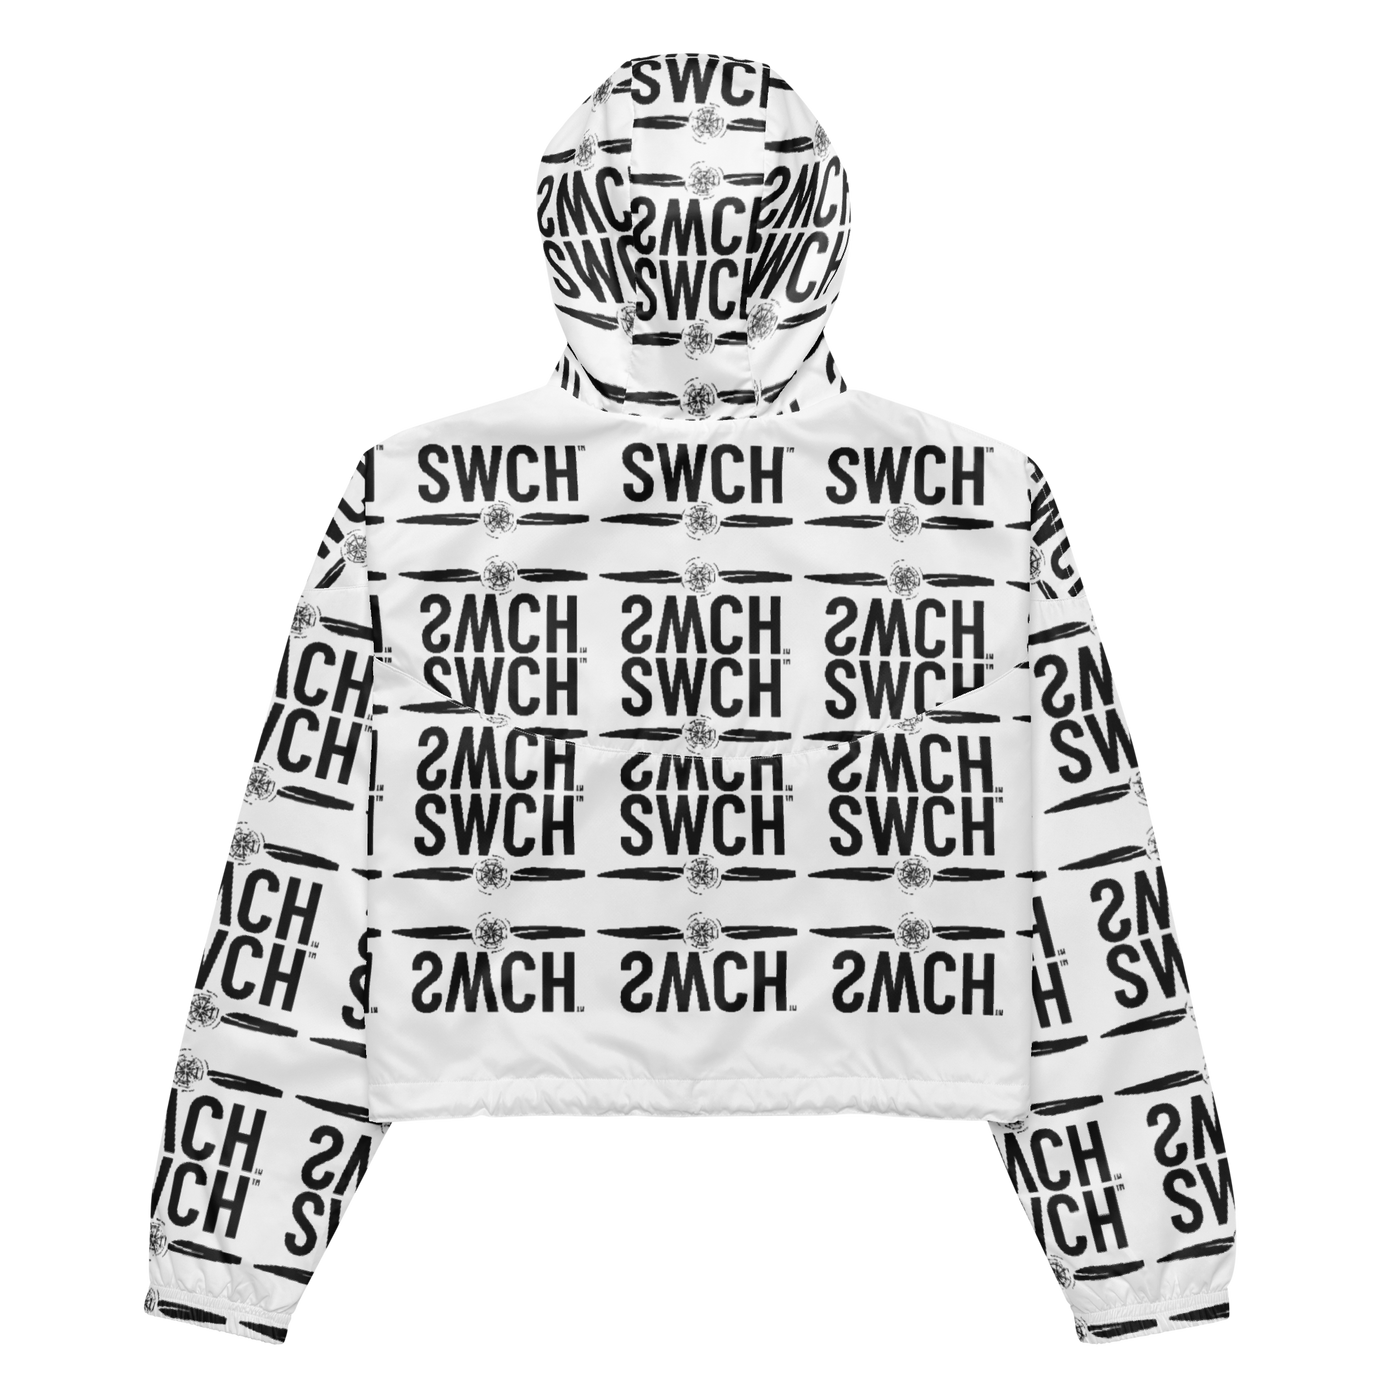 Get trendy with Women’s cropped windbreaker - SWCH PROP -  available at SWCH Store. Grab yours for £55 today!